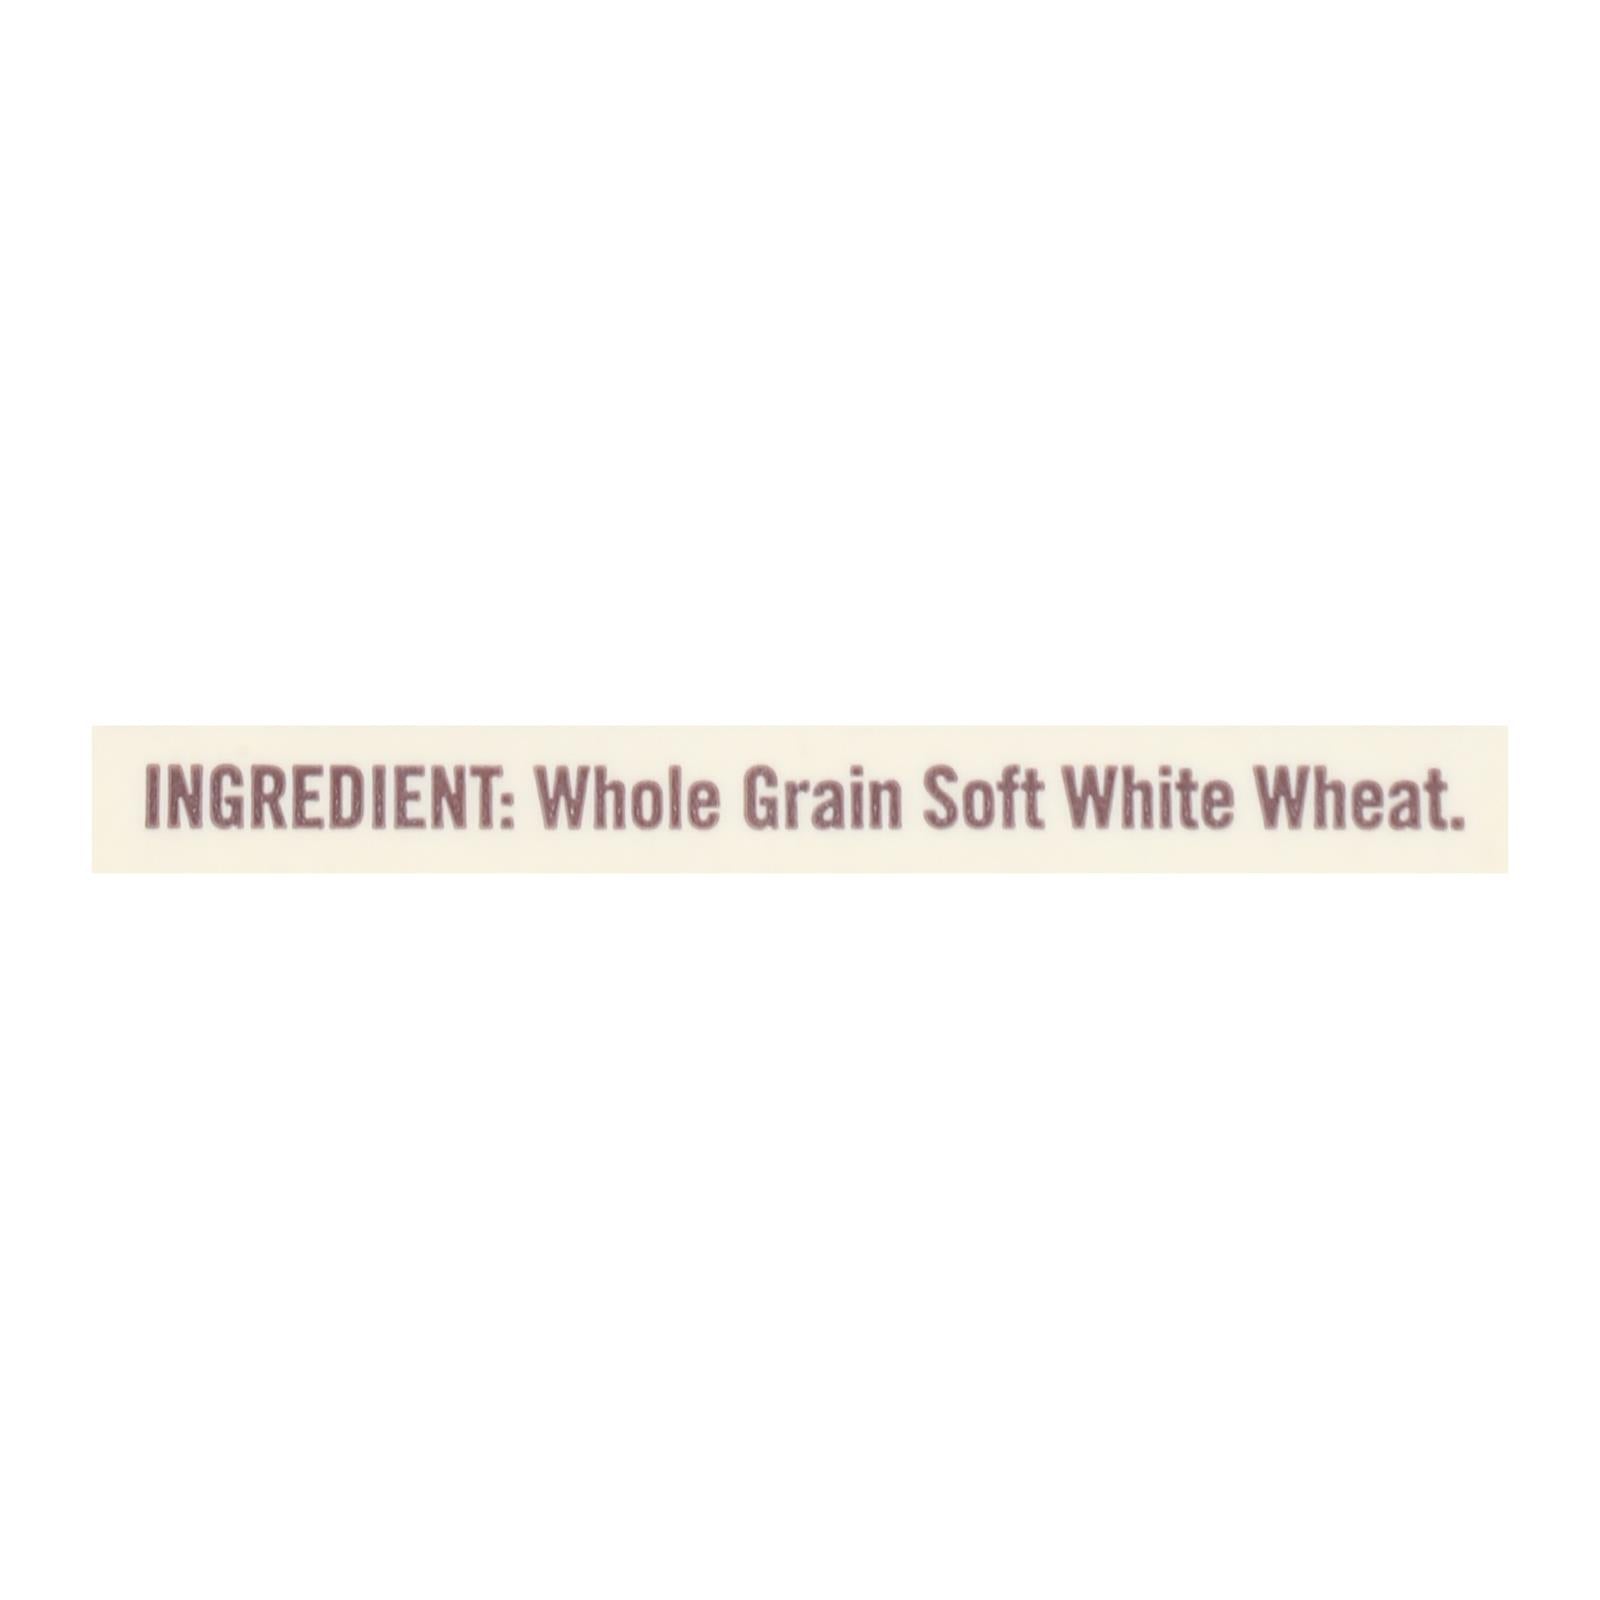 Bob's Red Mill - Whole Wheat Pastry Flour - 5 Lb - Case Of 4